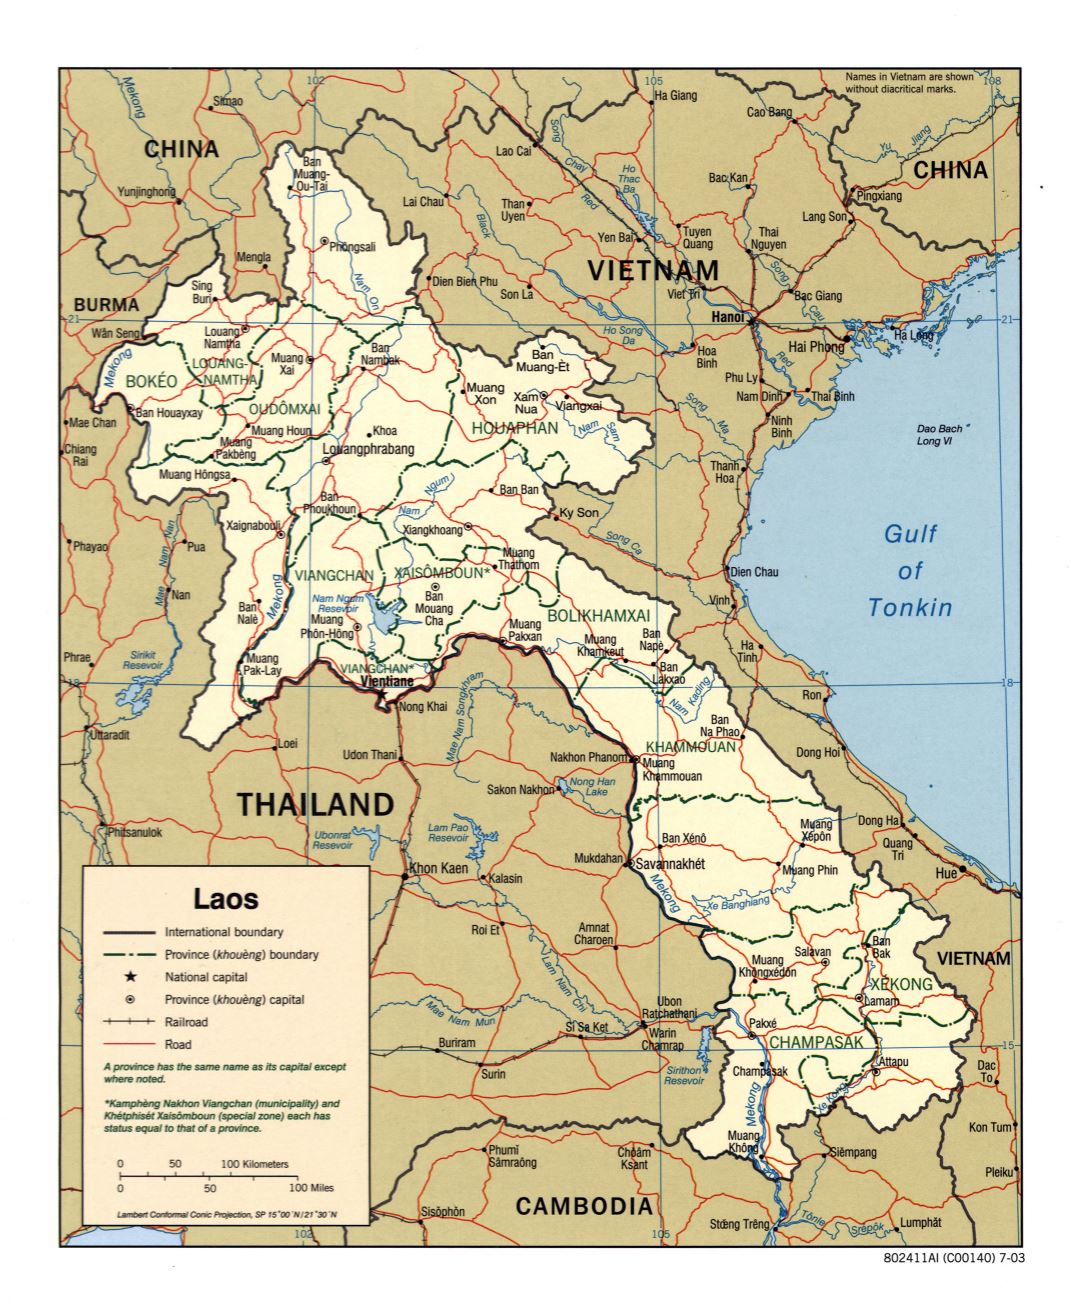 Large scale political and administrative map of Laos with roads, railroads and major cities - 2003